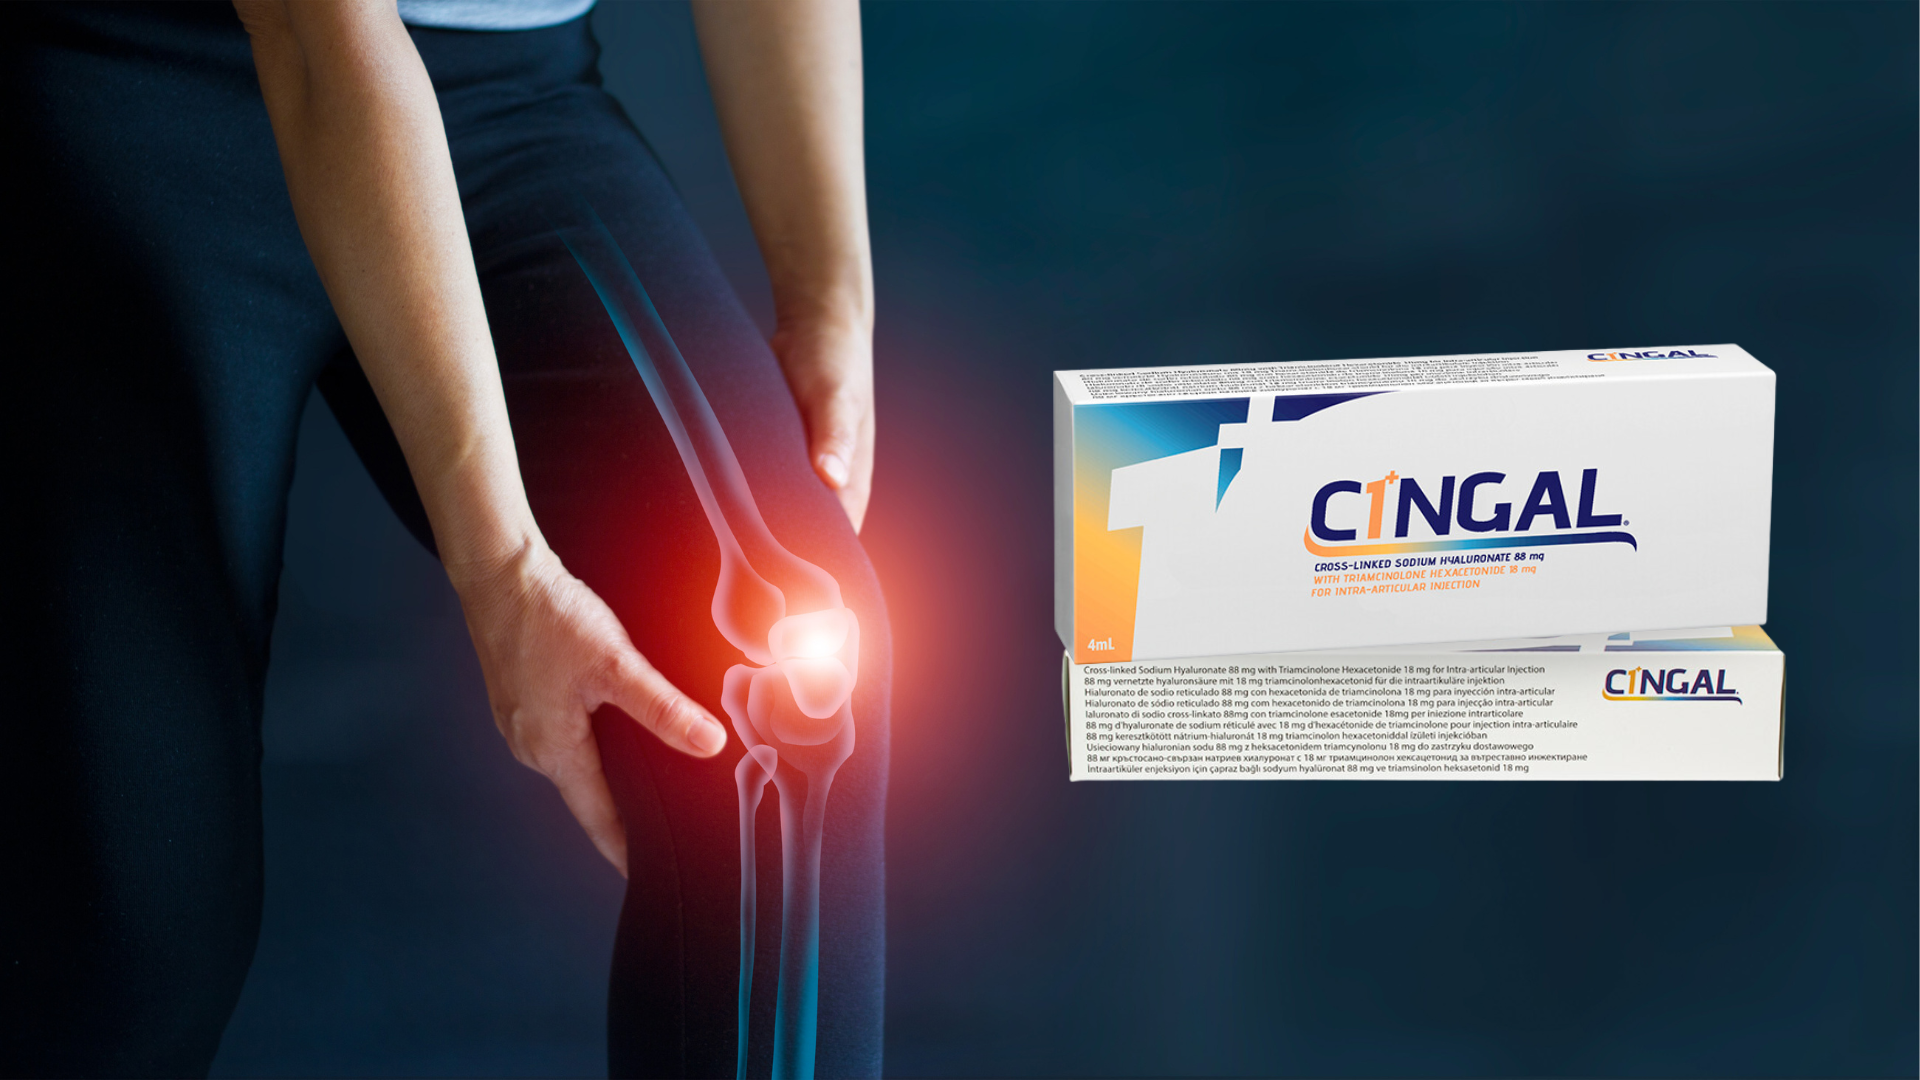 Cingal injections for knee pain caused by osteoarthritis.